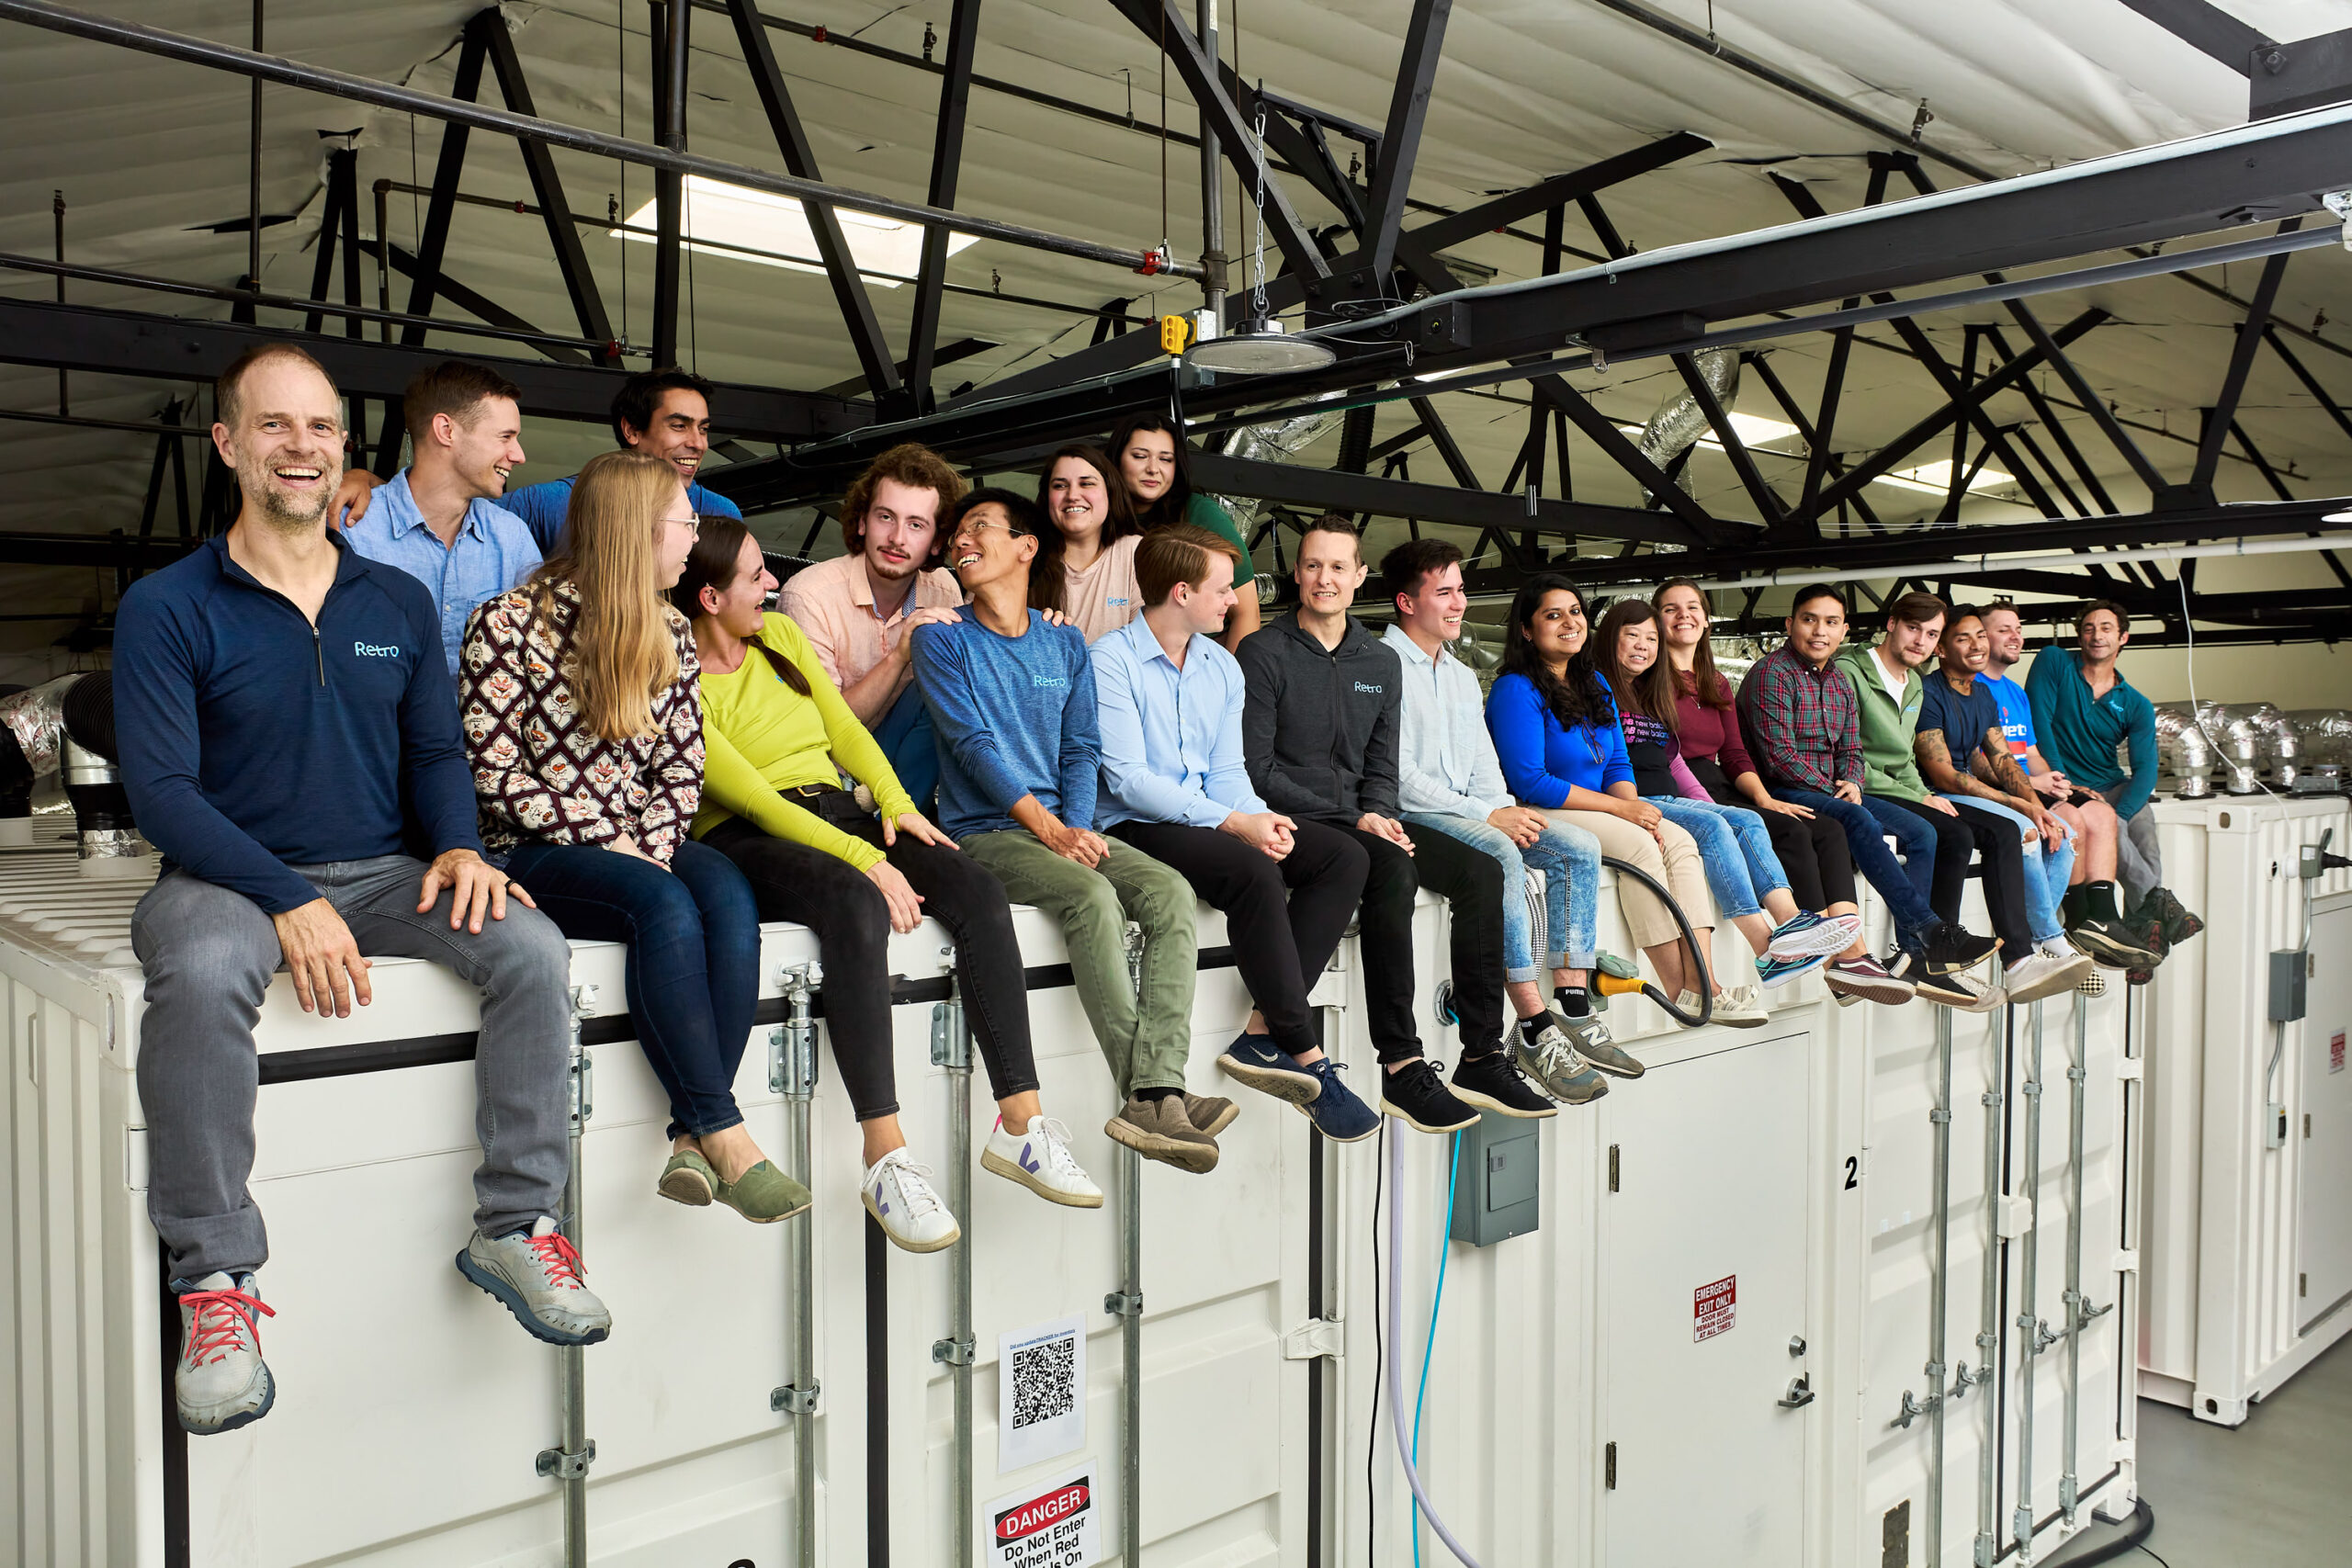 Retro Bio employees sitting on the top of the shipping containers that make up their lab space